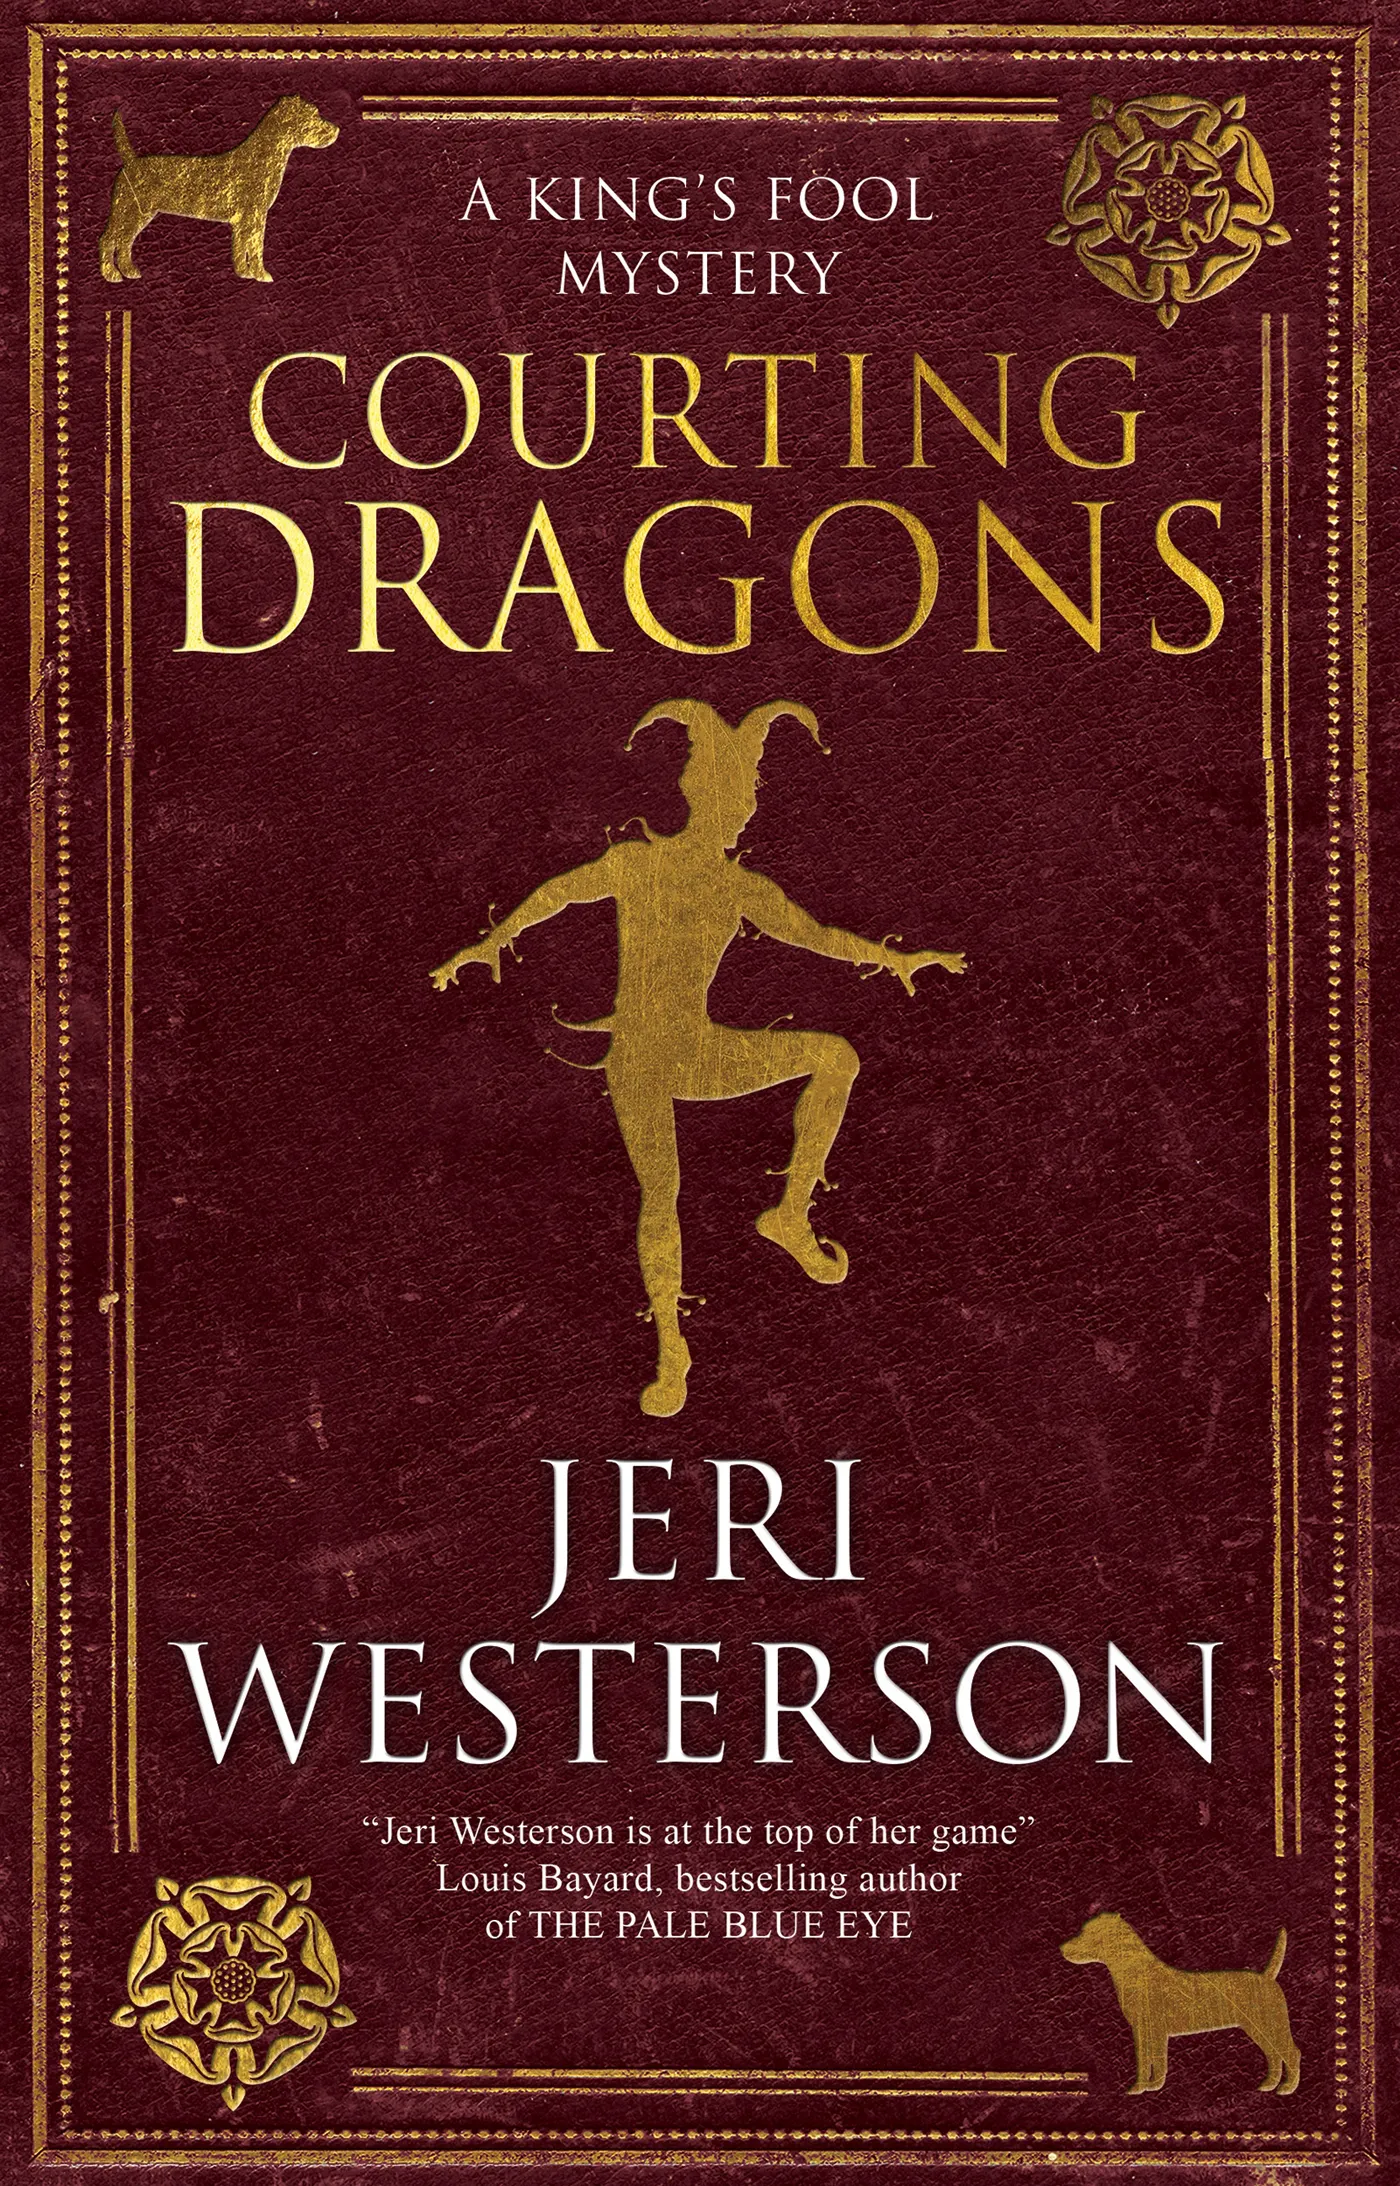 Courting Dragons (A King's Fool Mystery #1)